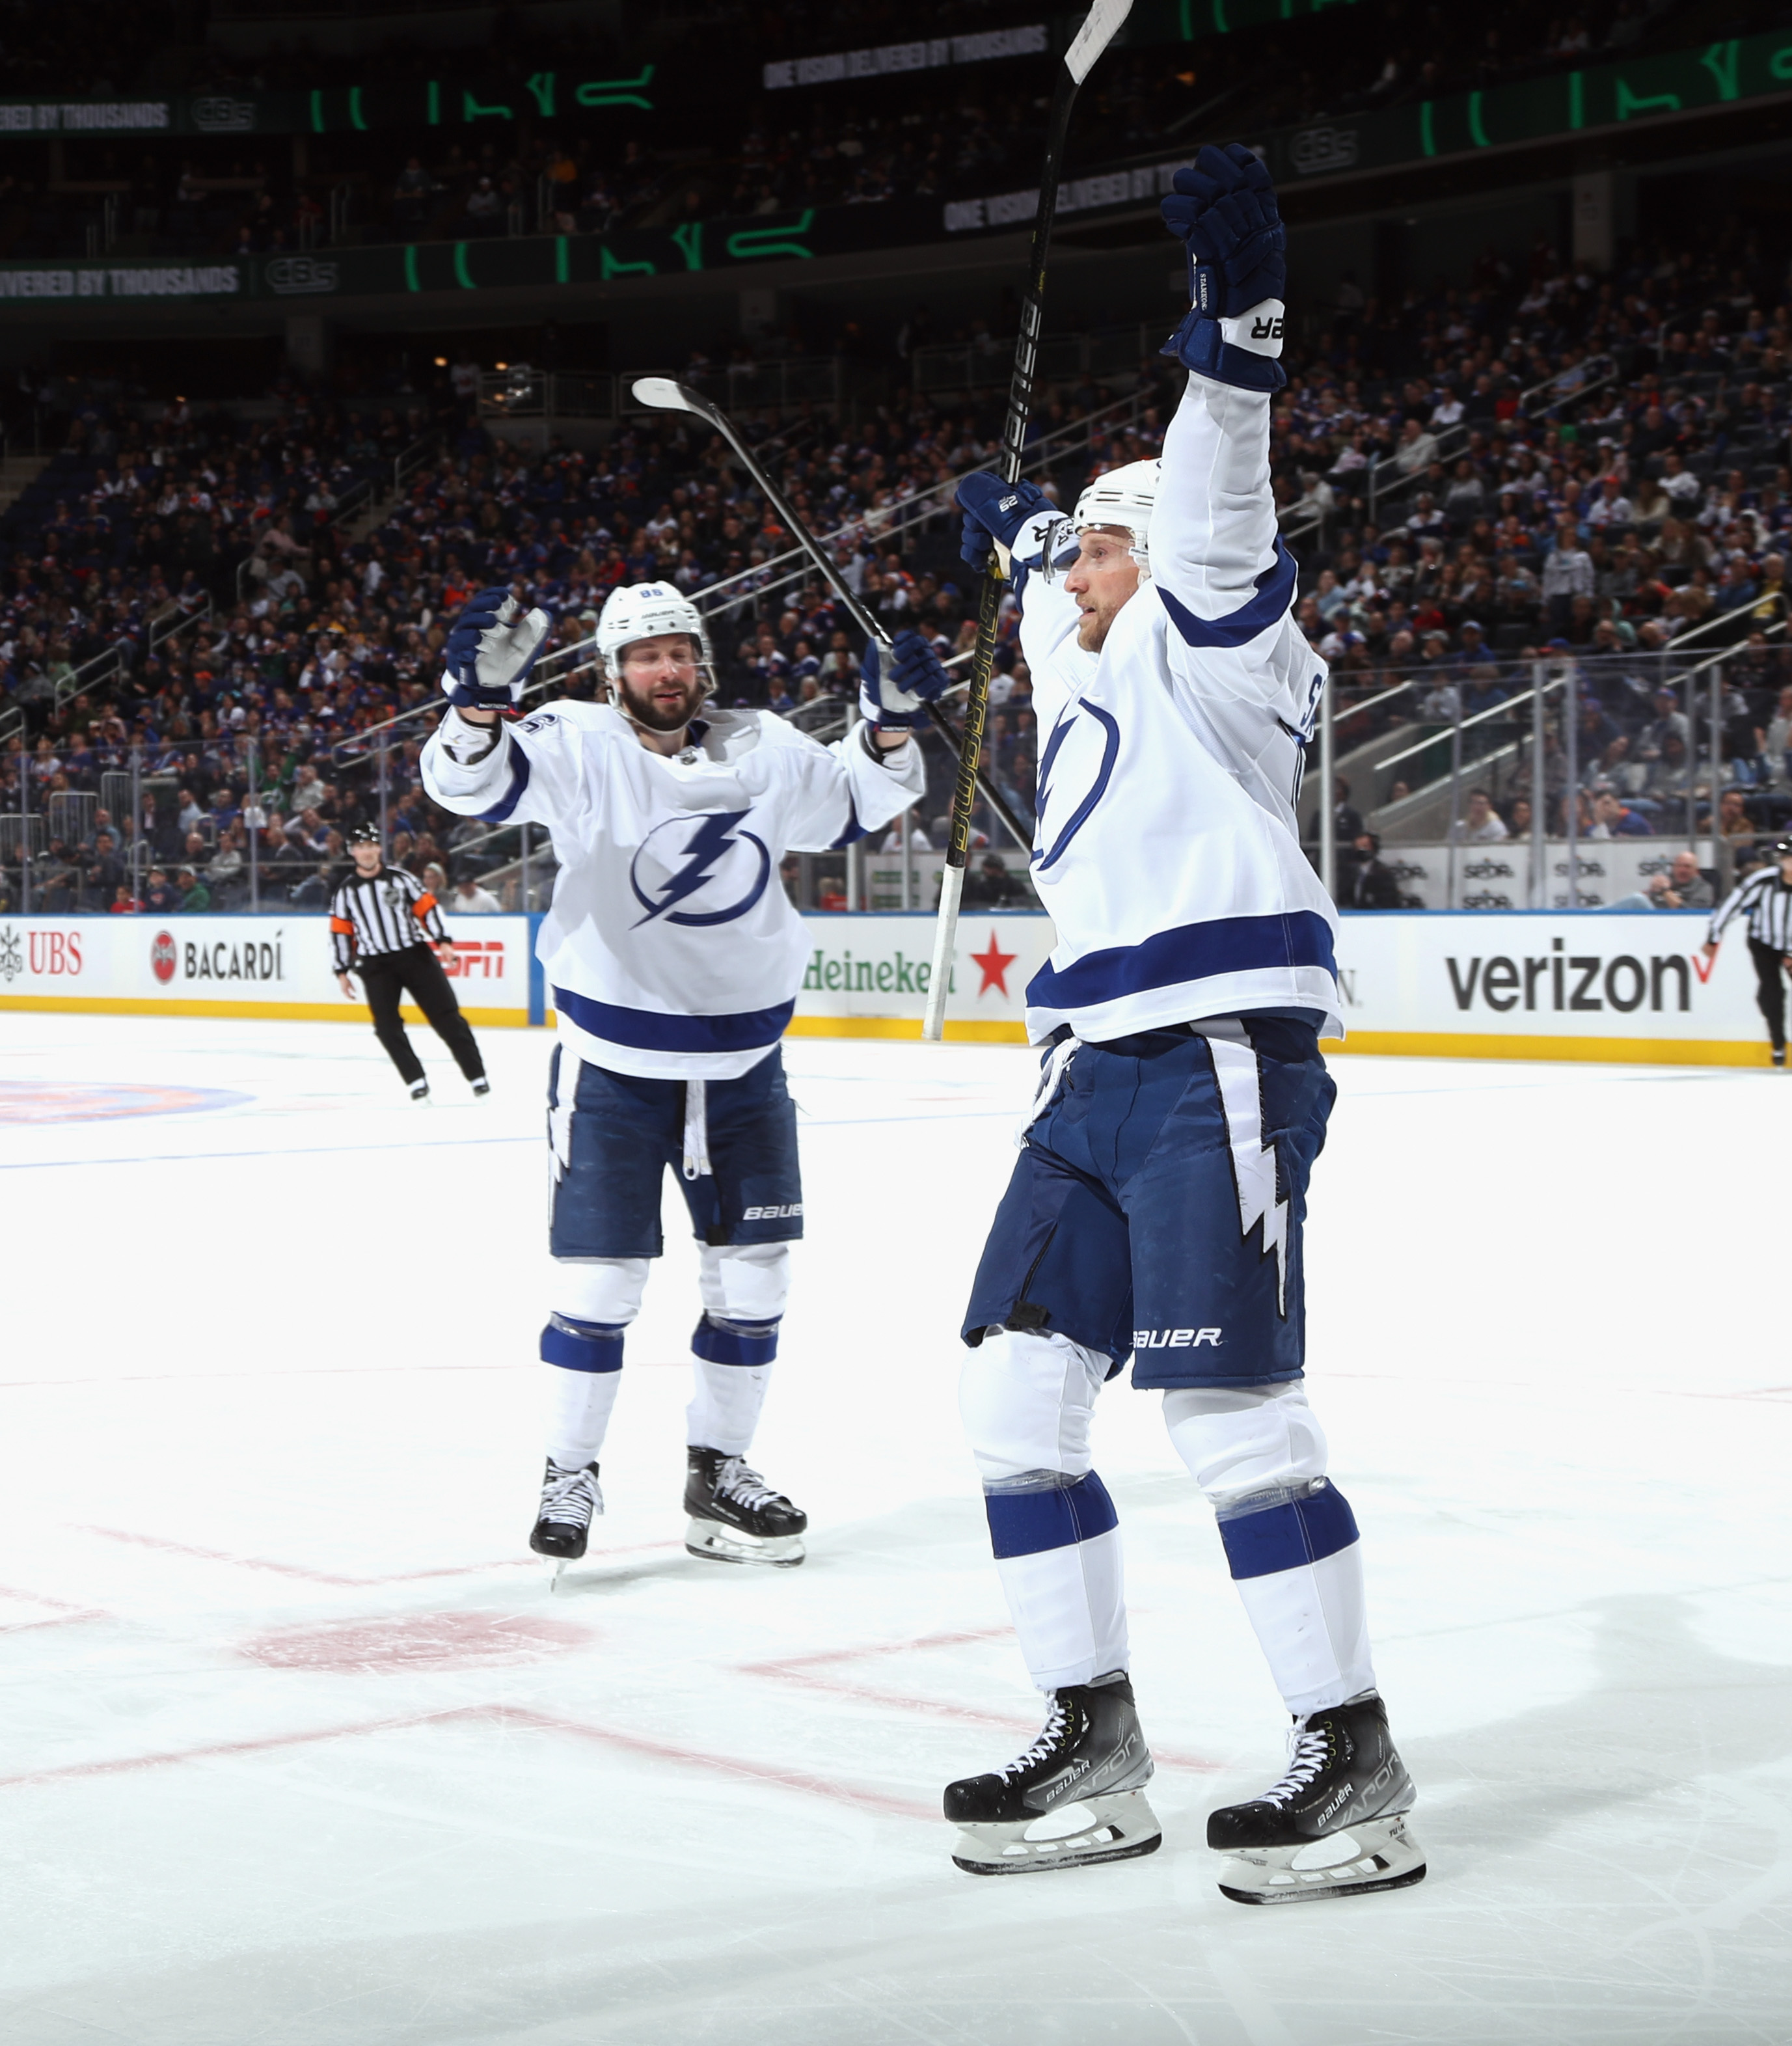 Steven Stamkos of the Tampa Bay Lightning celebrates his goal at 11:13 of the third period against the New York Islanders and is joined by Nikita Kucherov at UBS Arena on April 29, 2022 in Elmont, New York.